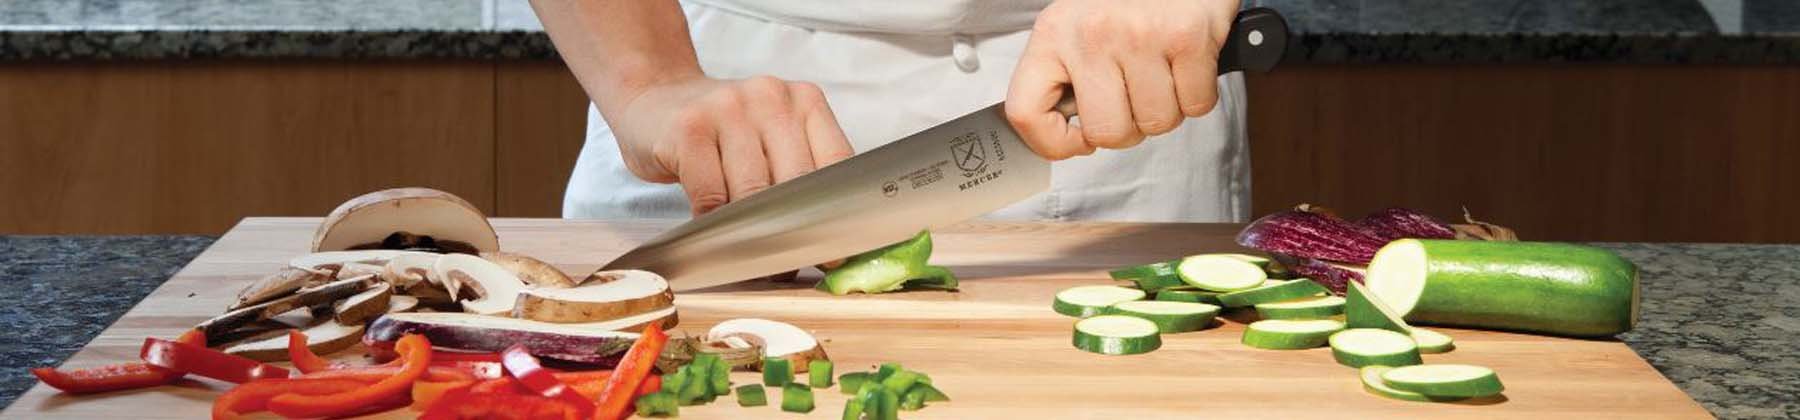 Photo of chef chopping vegetables with Mercer knife.